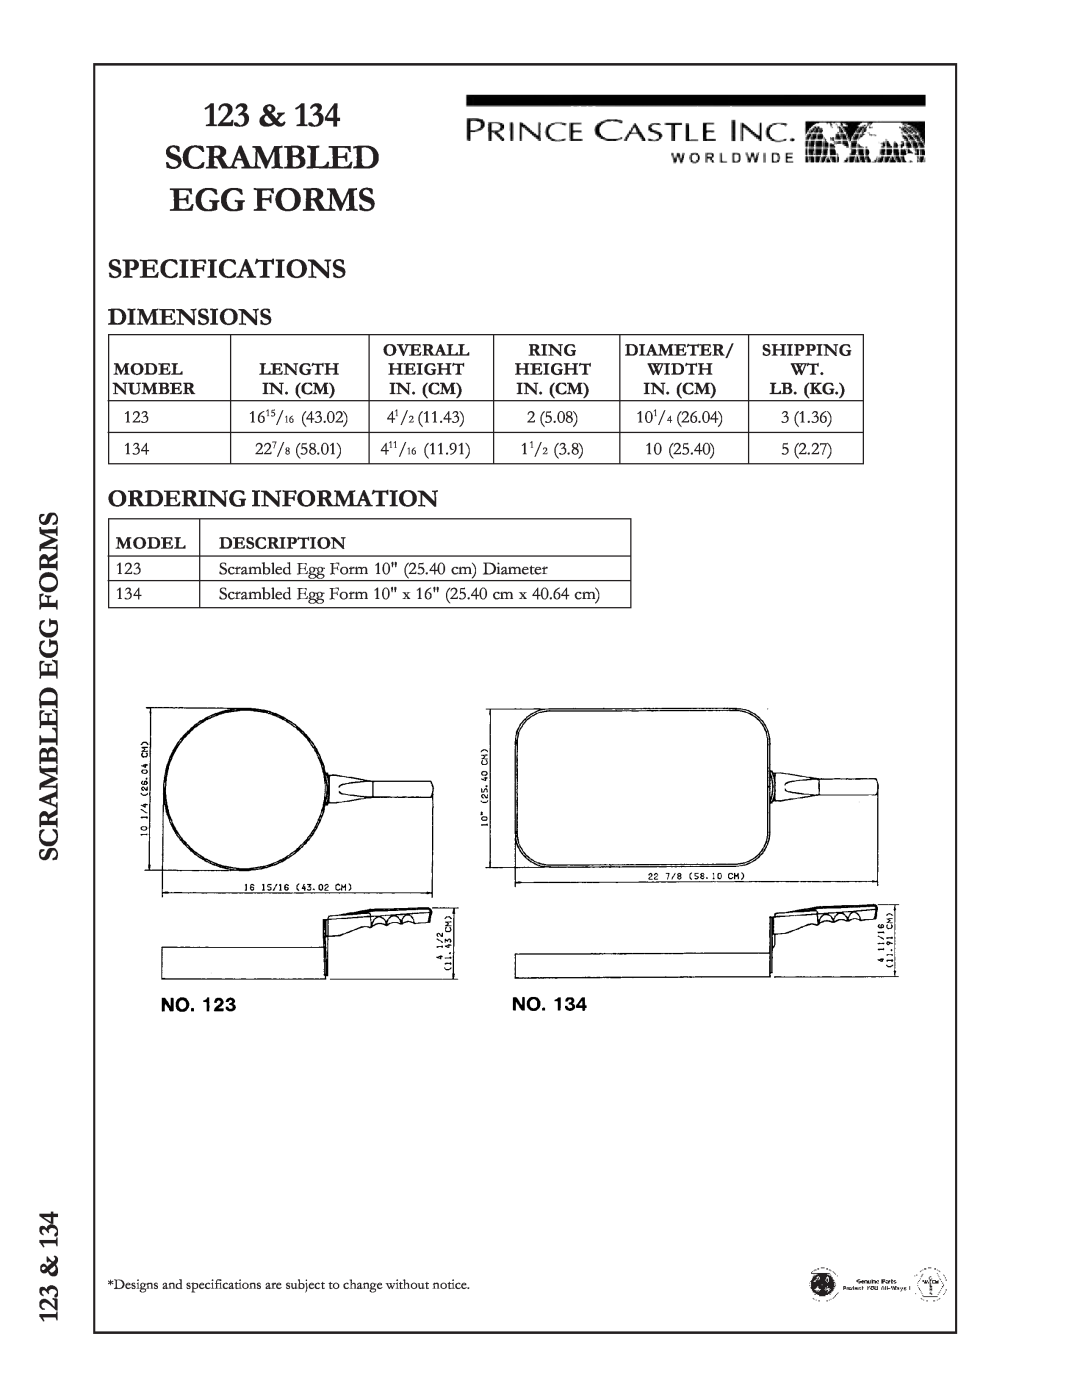 Prince Castle 134 manual Scrambled Egg Forms, Specifications, 123, Dimensions, Ordering Information 